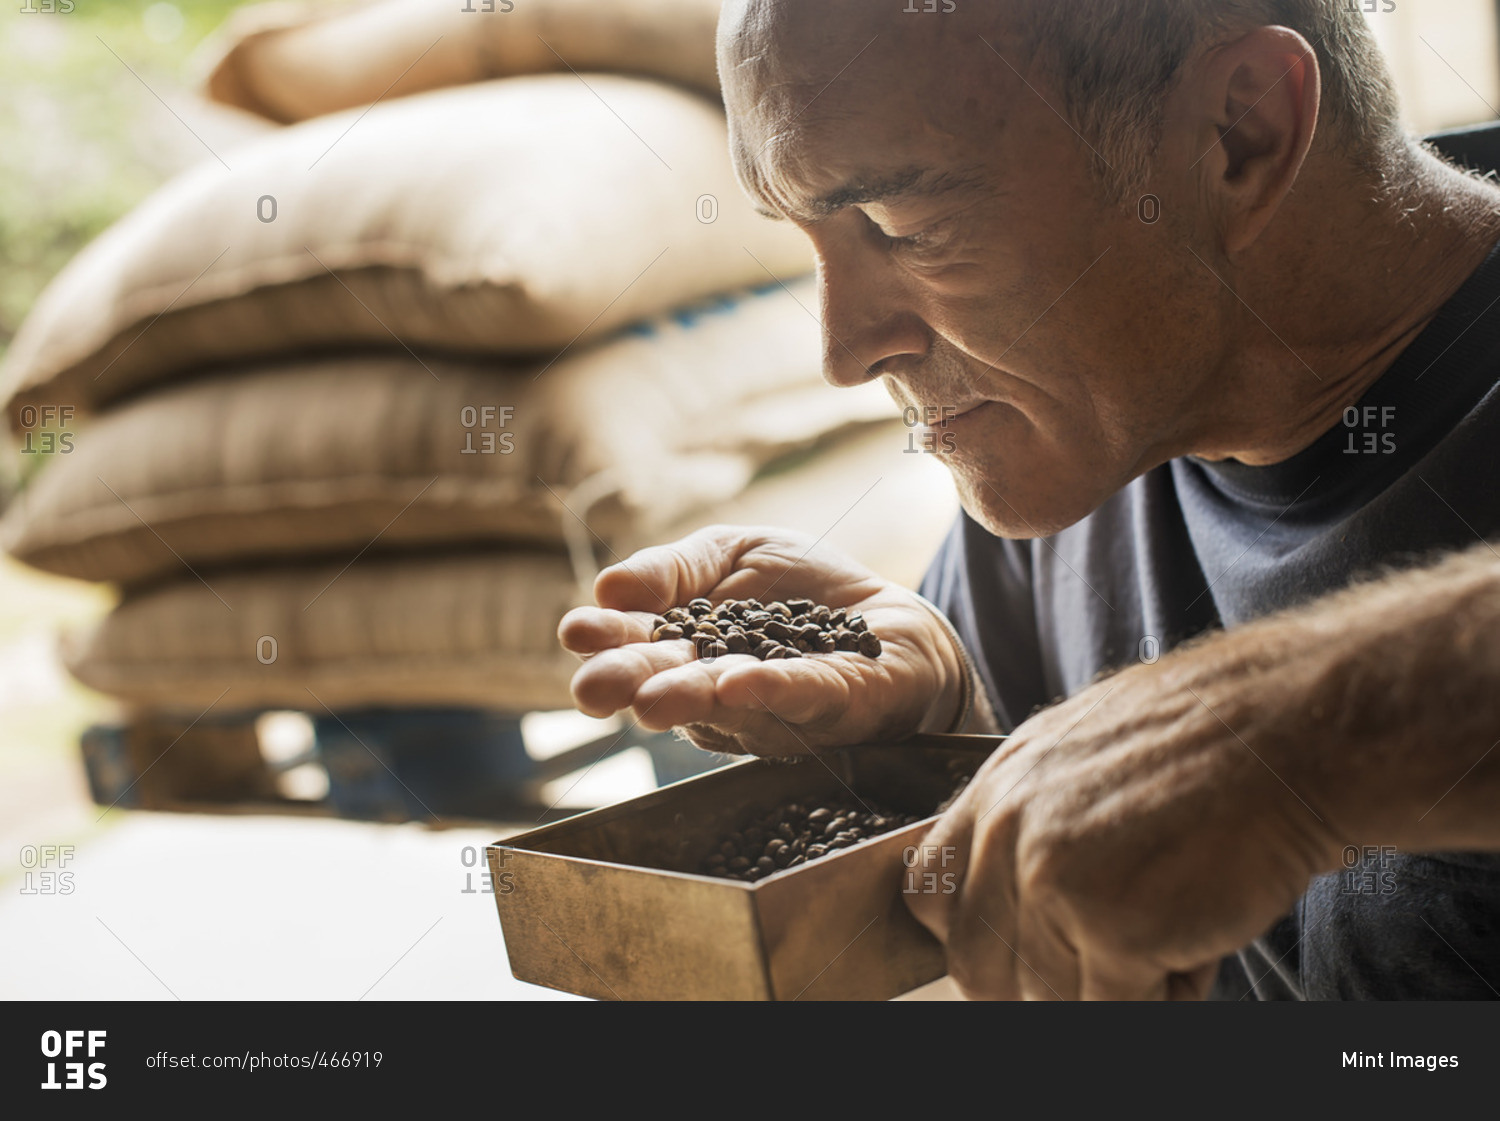 A man examining and smelling the aroma of beans at a coffee bean processing shed, on a farm